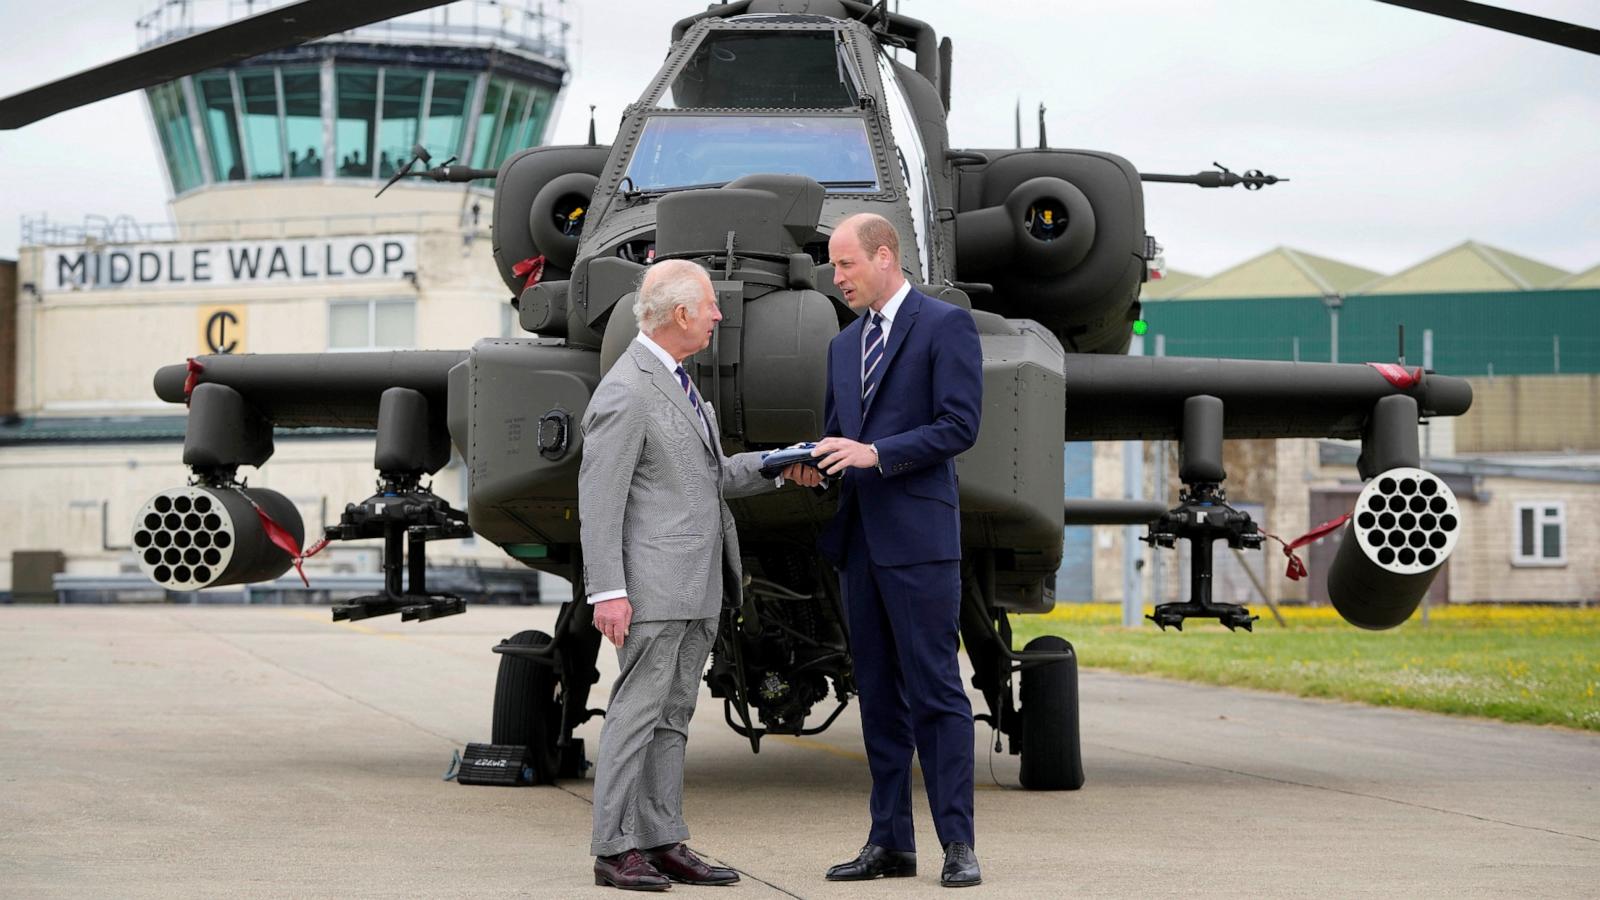 PHOTO: Britain's King Charles III officially hands over the role of Colonel-in-Chief of the Army Air Corps to Britain's Prince William in front of an Apache helicopter in Middle Wallop, England, on May 13, 2024.